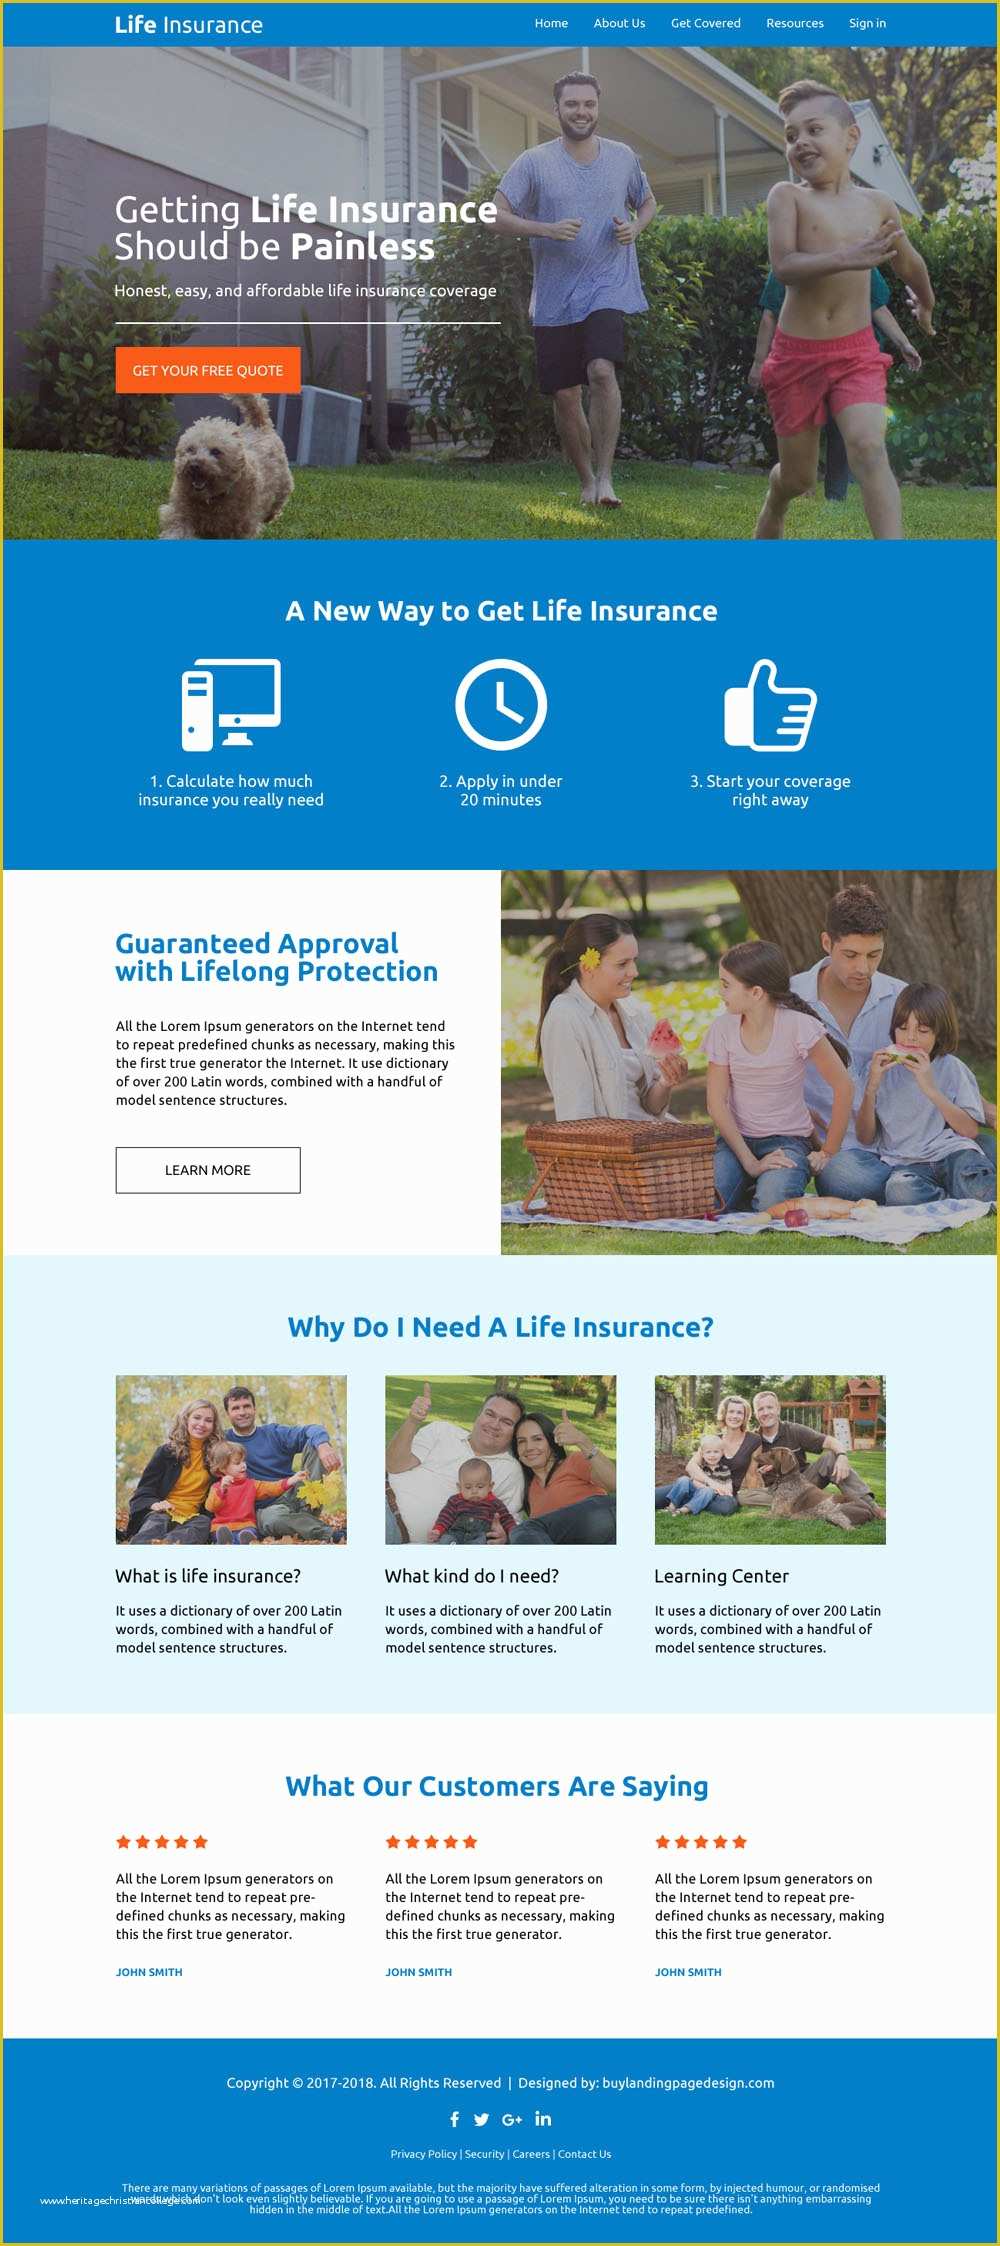 Life Insurance Website Templates Free Download Of Life Insurance Pany Website Design 03